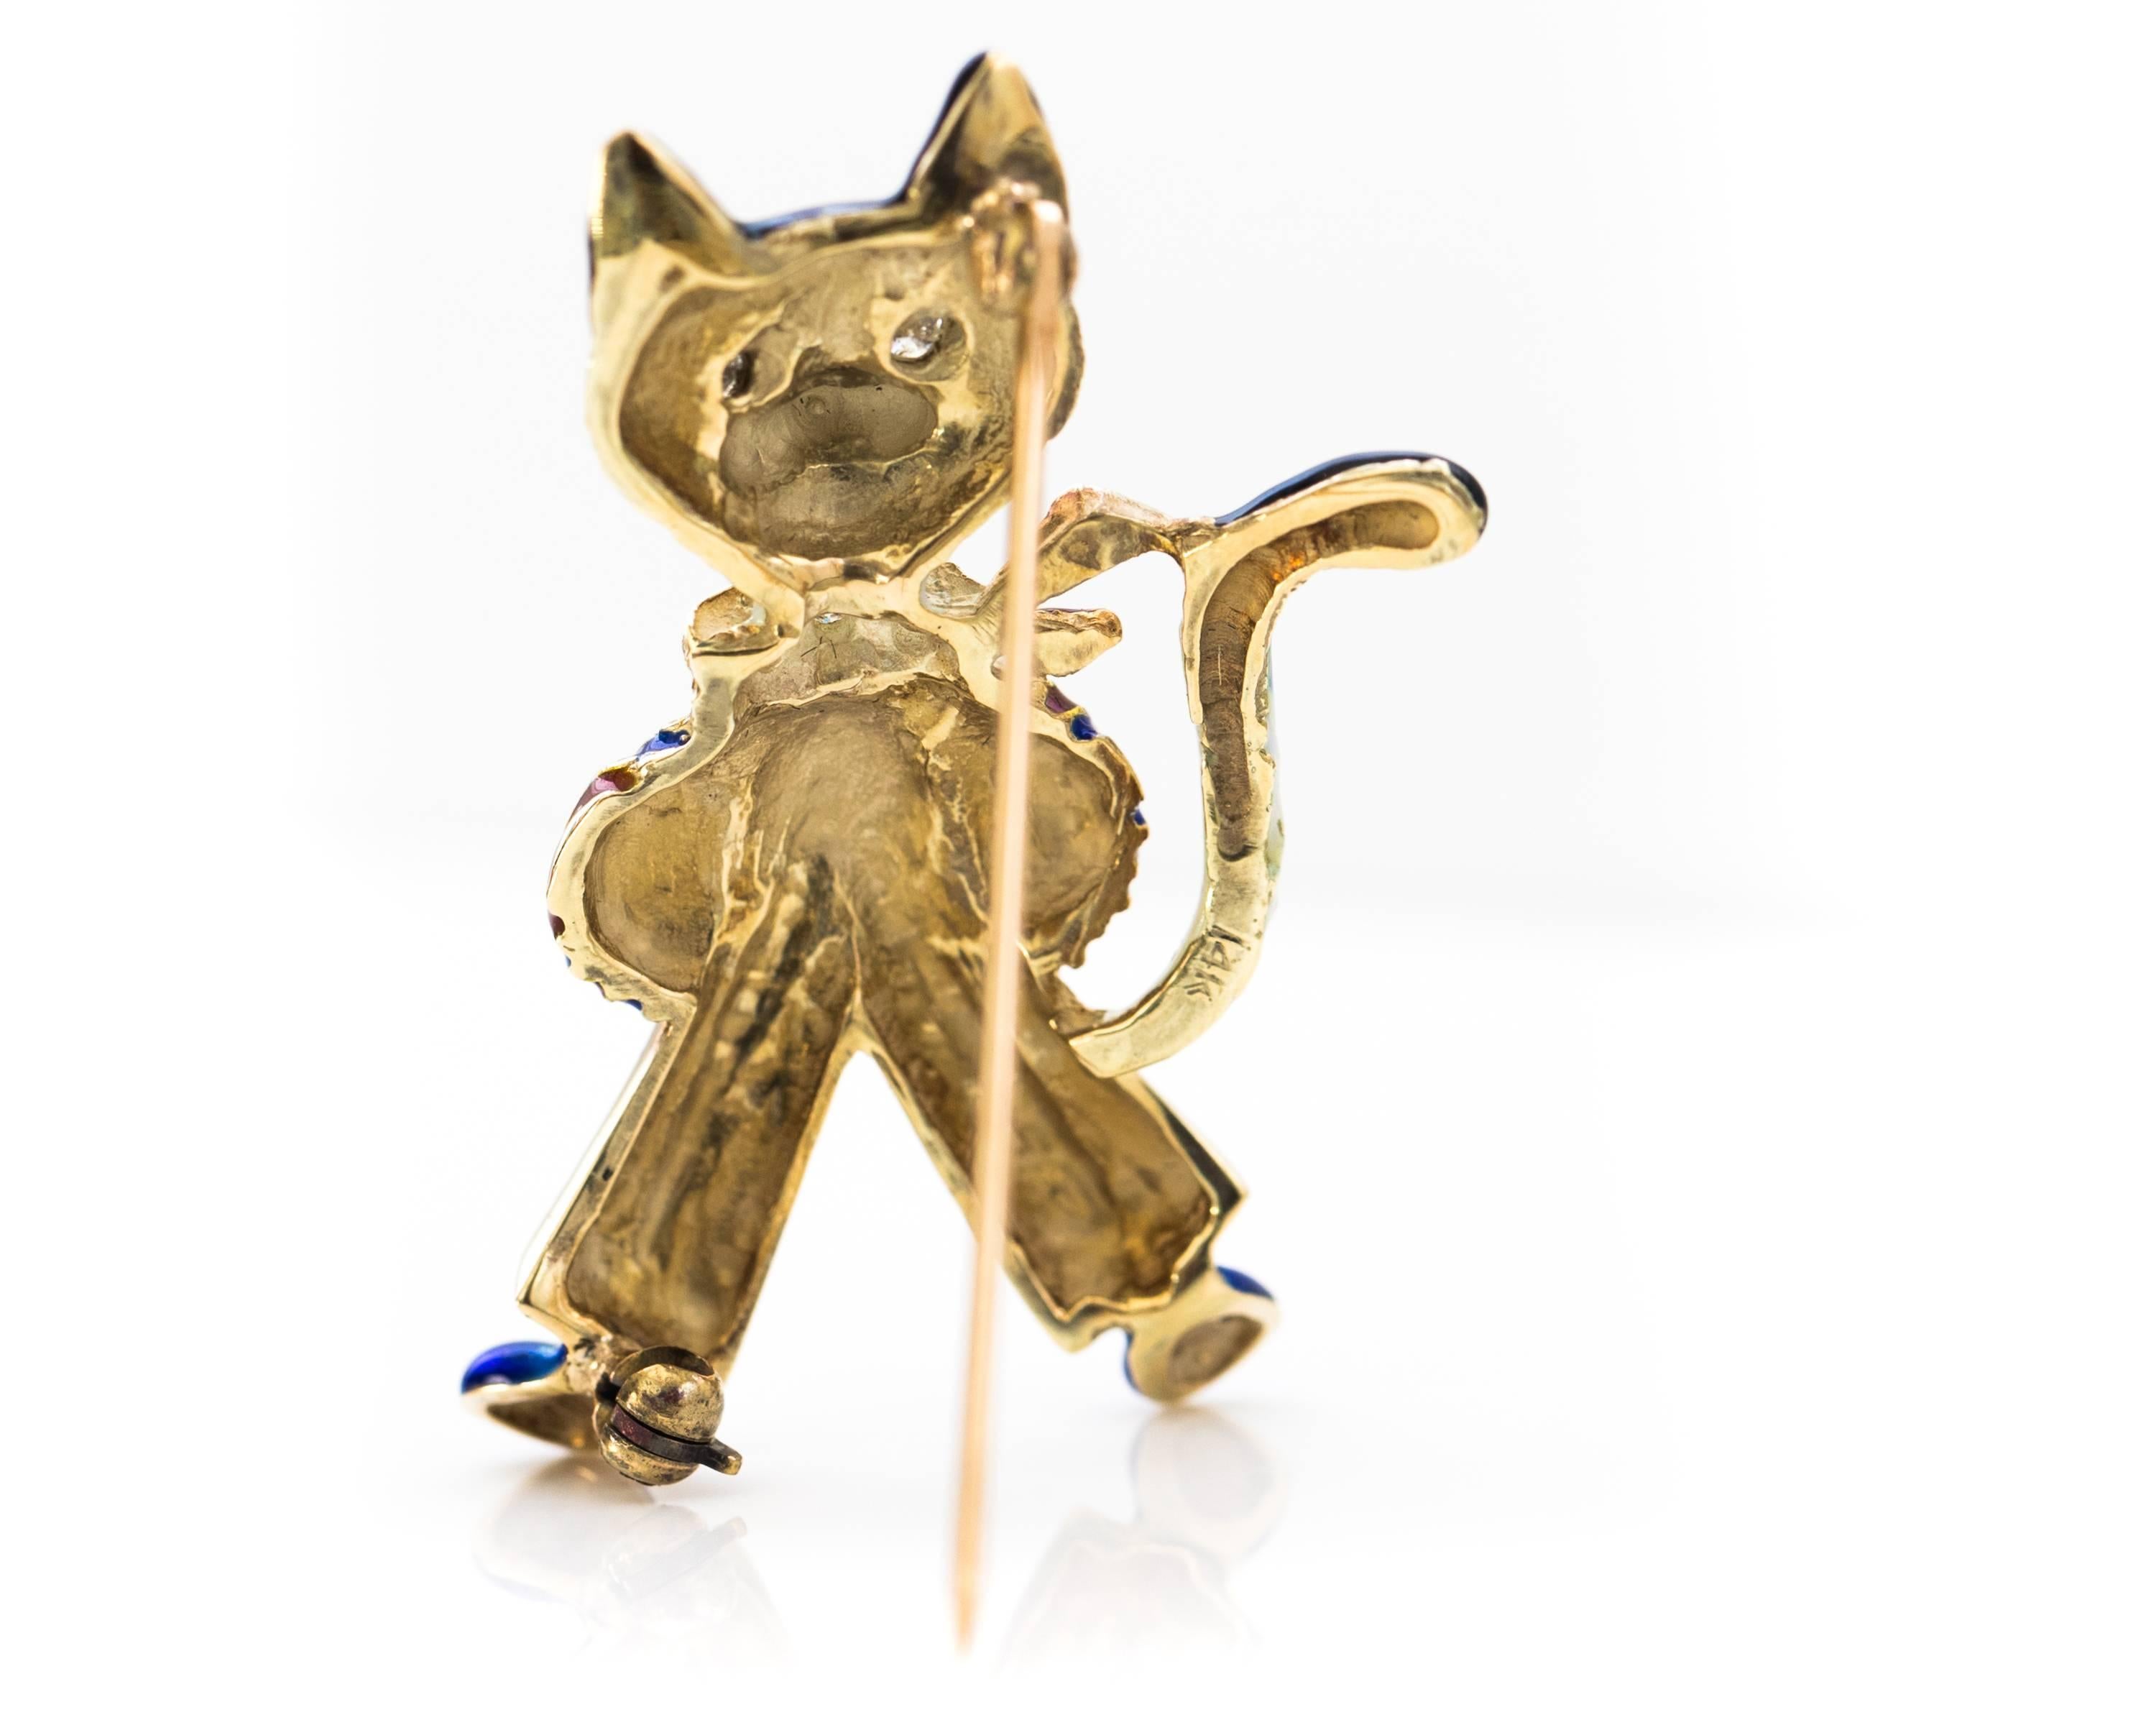 1950s Retro 14K Yellow Gold, Diamond and Enamel Fancy Cat Brooch.

This Hand Painted pin features Red, White and Blue Enamel with 5 Diamonds and 14K Yellow Gold.

Rich Blue fur frames the Happy Cat's white face and ears. The inner ears and sweet